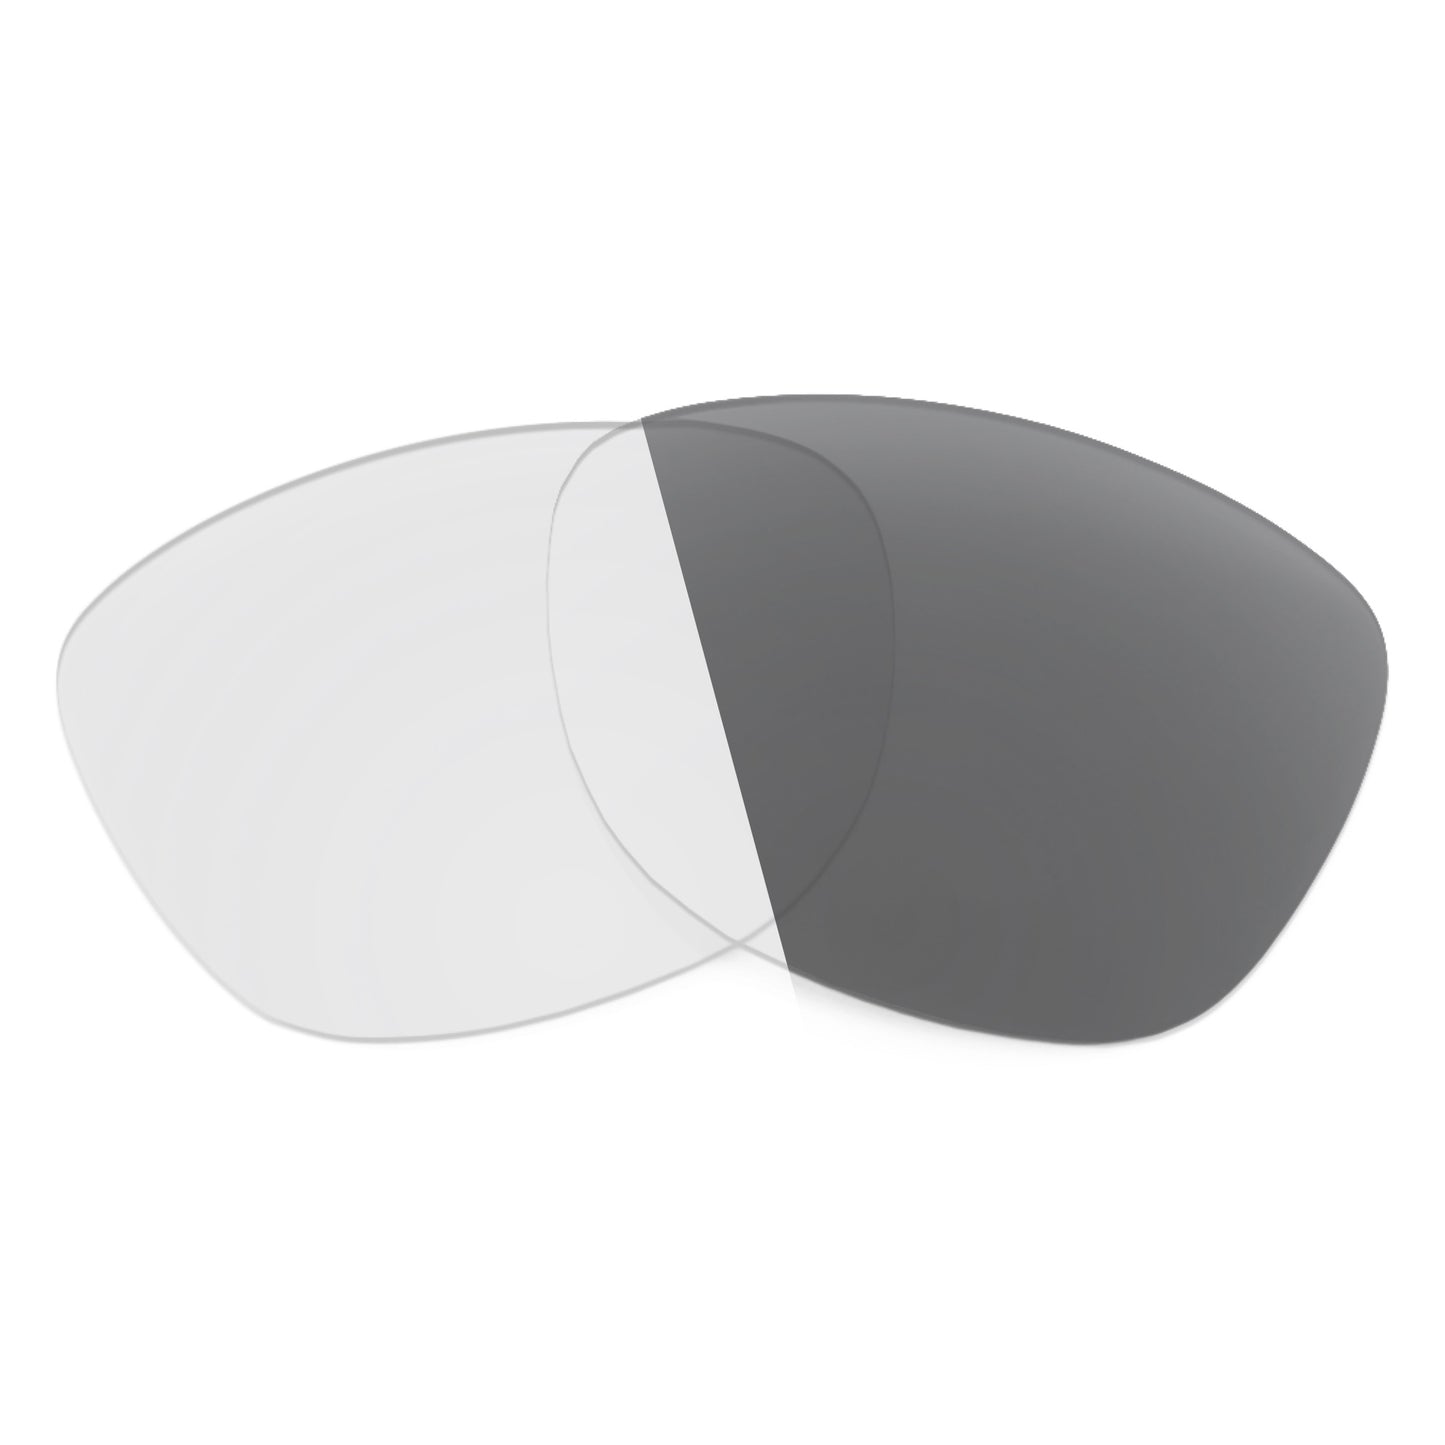 Revant replacement lenses for Ray-Ban New Wayfarer Liteforce RB4207 55mm Non-Polarized Adapt Gray Photochromic